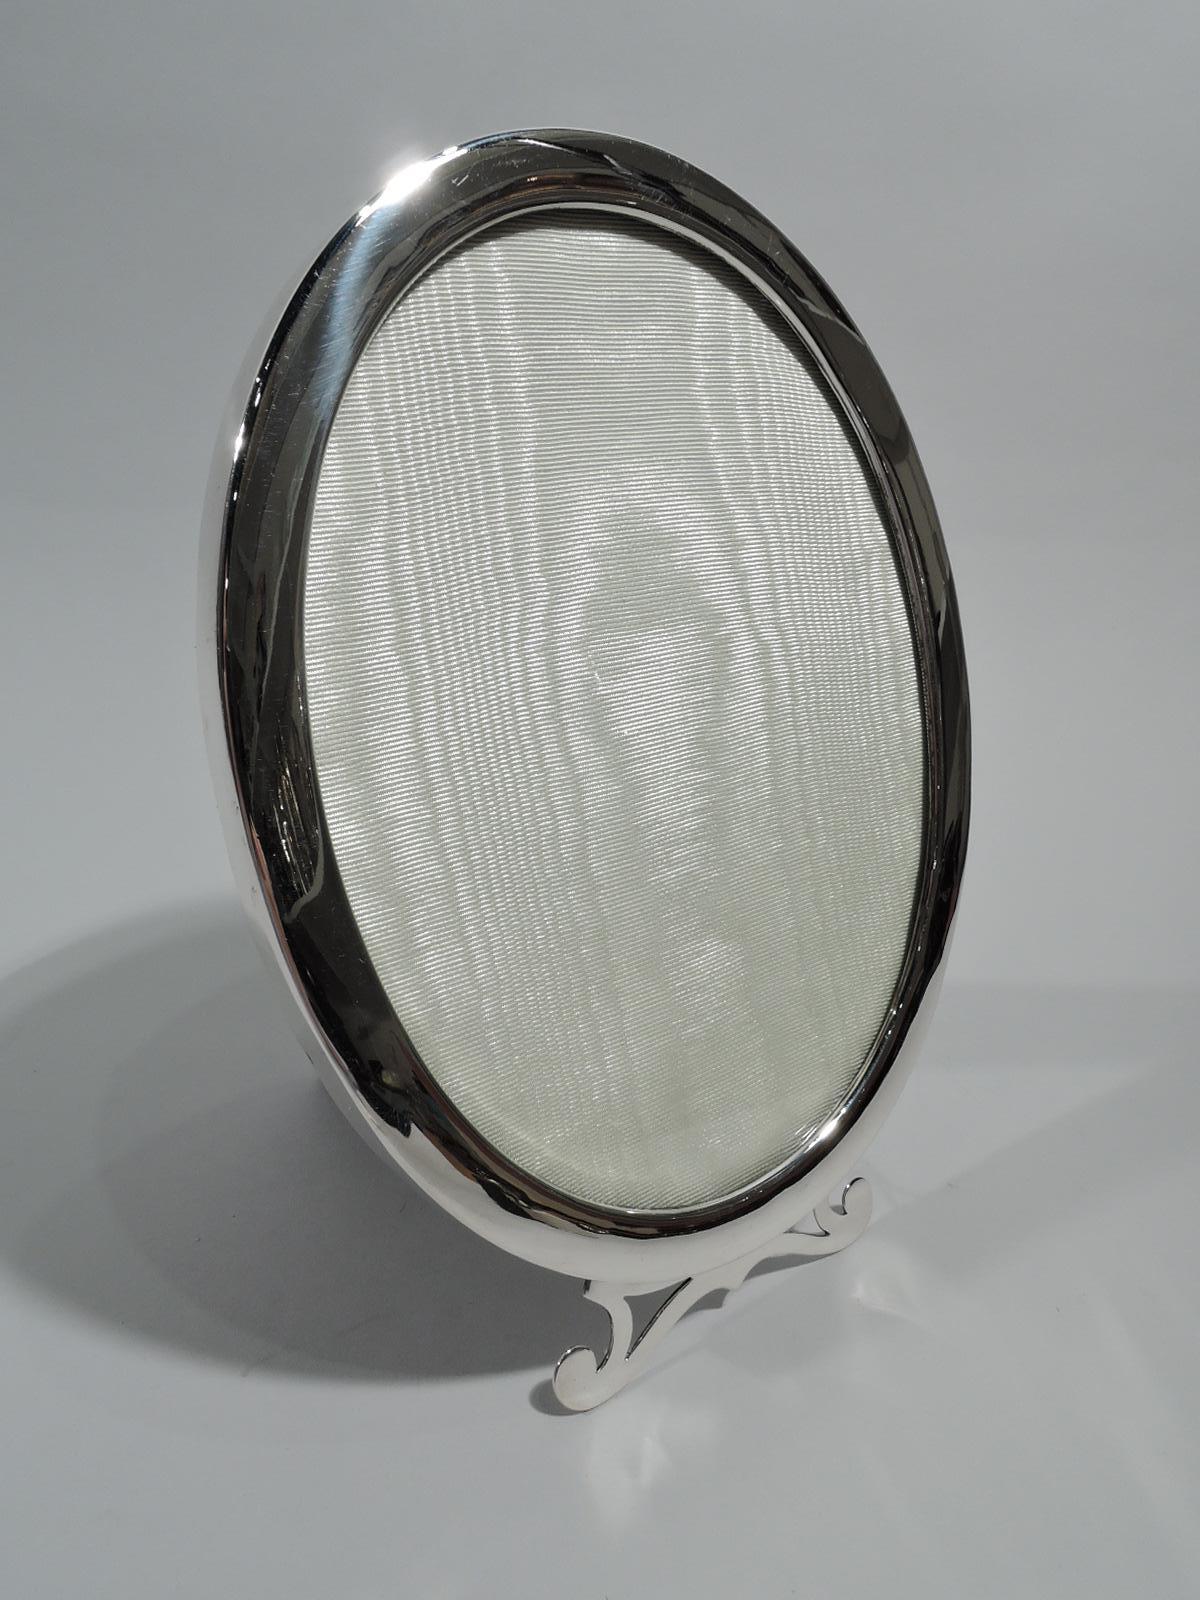 Modern classical sterling silver picture frame. Made by Birks in Canada, ca 1950. Oval window in plain surround on open scrolled support. With glass, silk lining, and velvet back and hinged and chained easel support. Marked “Birks / Sterling”.